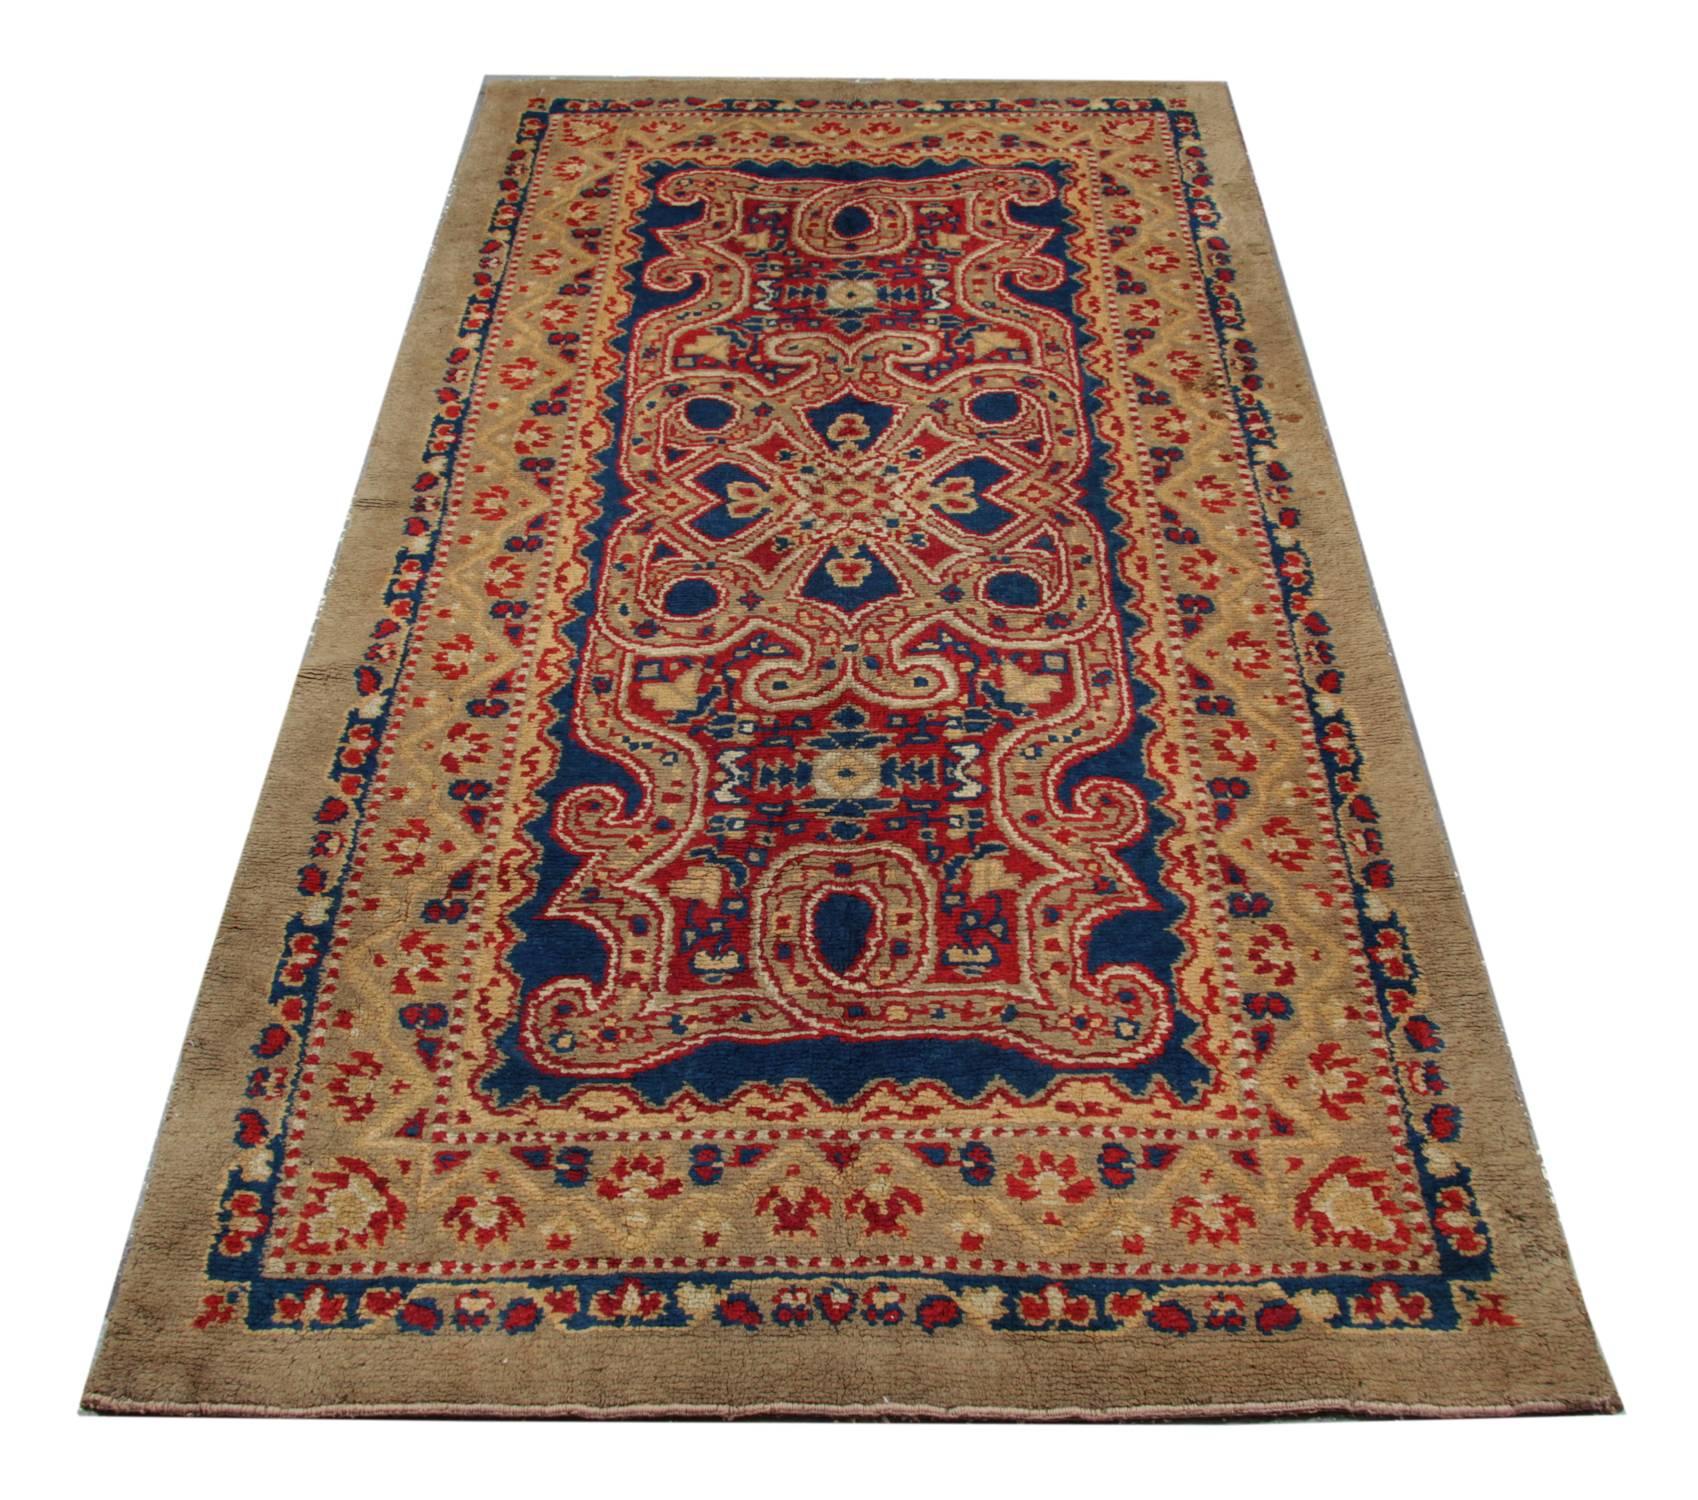 A woven rug English Axminster with a bold and elegant luxury rugs design in excellent condition.
These large living room rugs have a fascinating colour combination which would go with the classical or modern decor. This brown rug is kind of rugs and